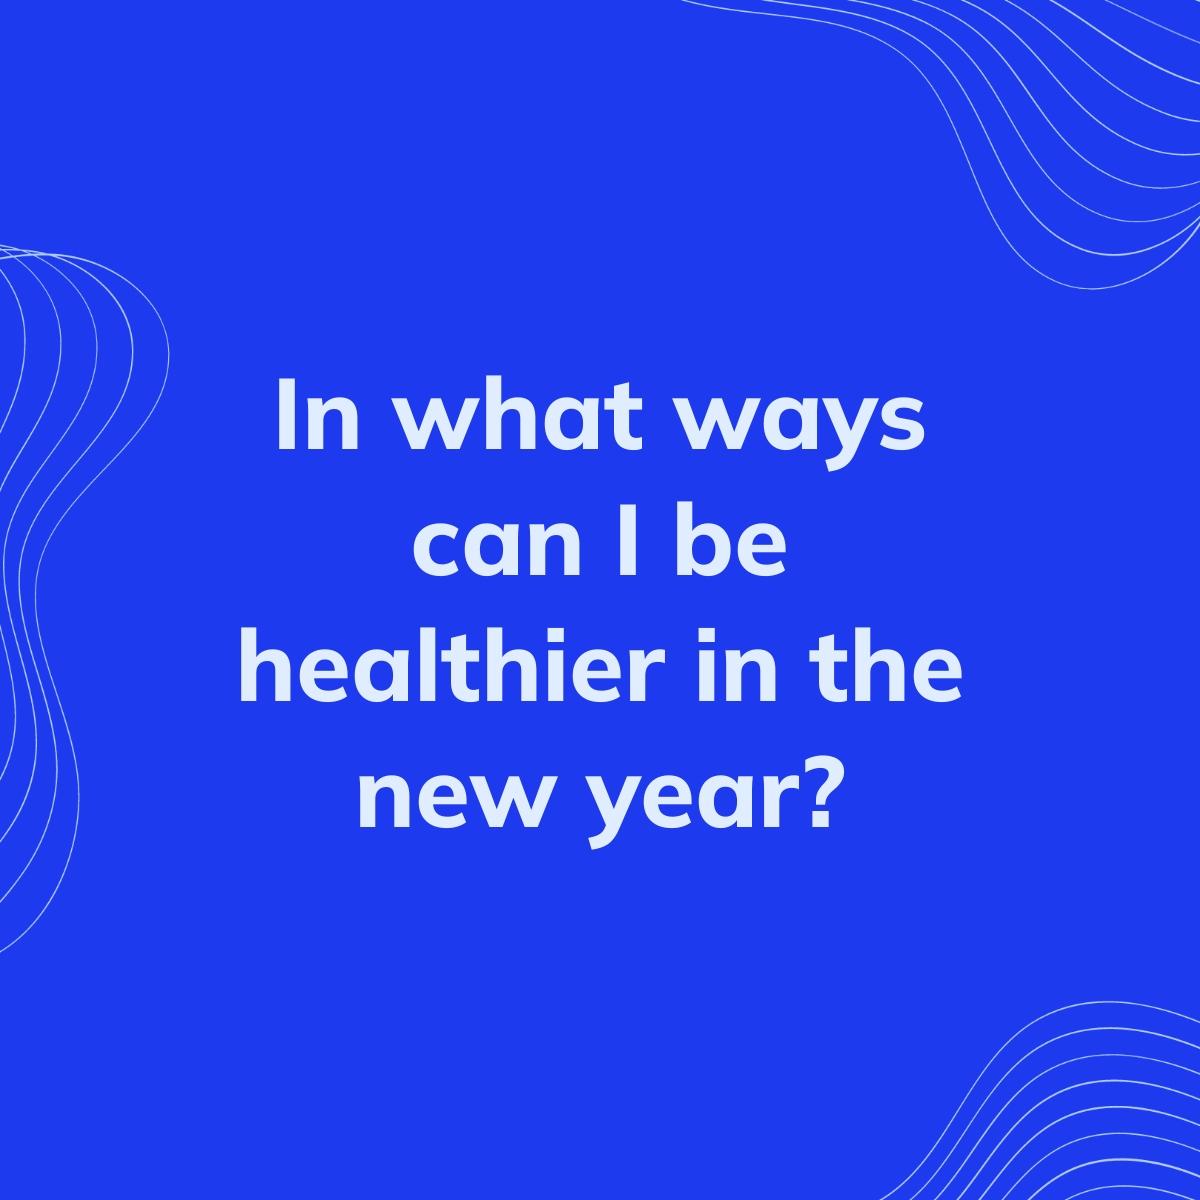 Journal Prompt: In what ways can I be healthier in the new year?